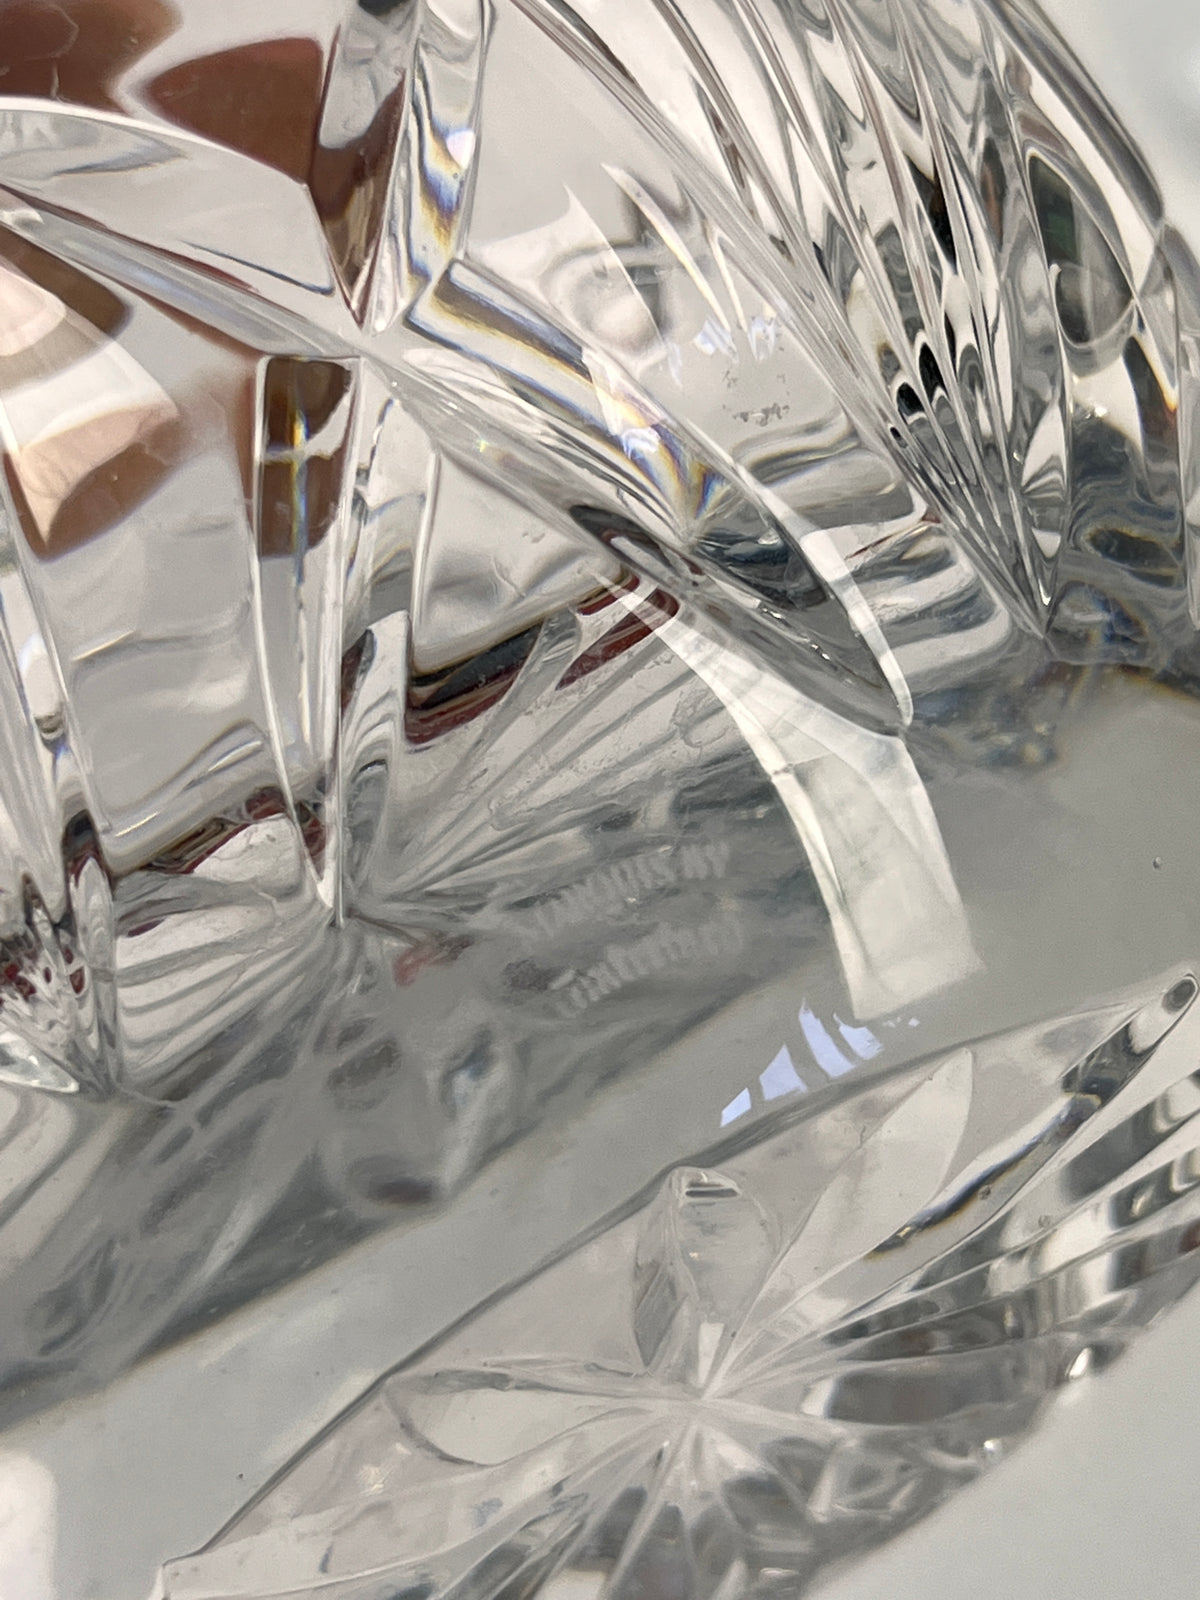 Waterford Crystal Review